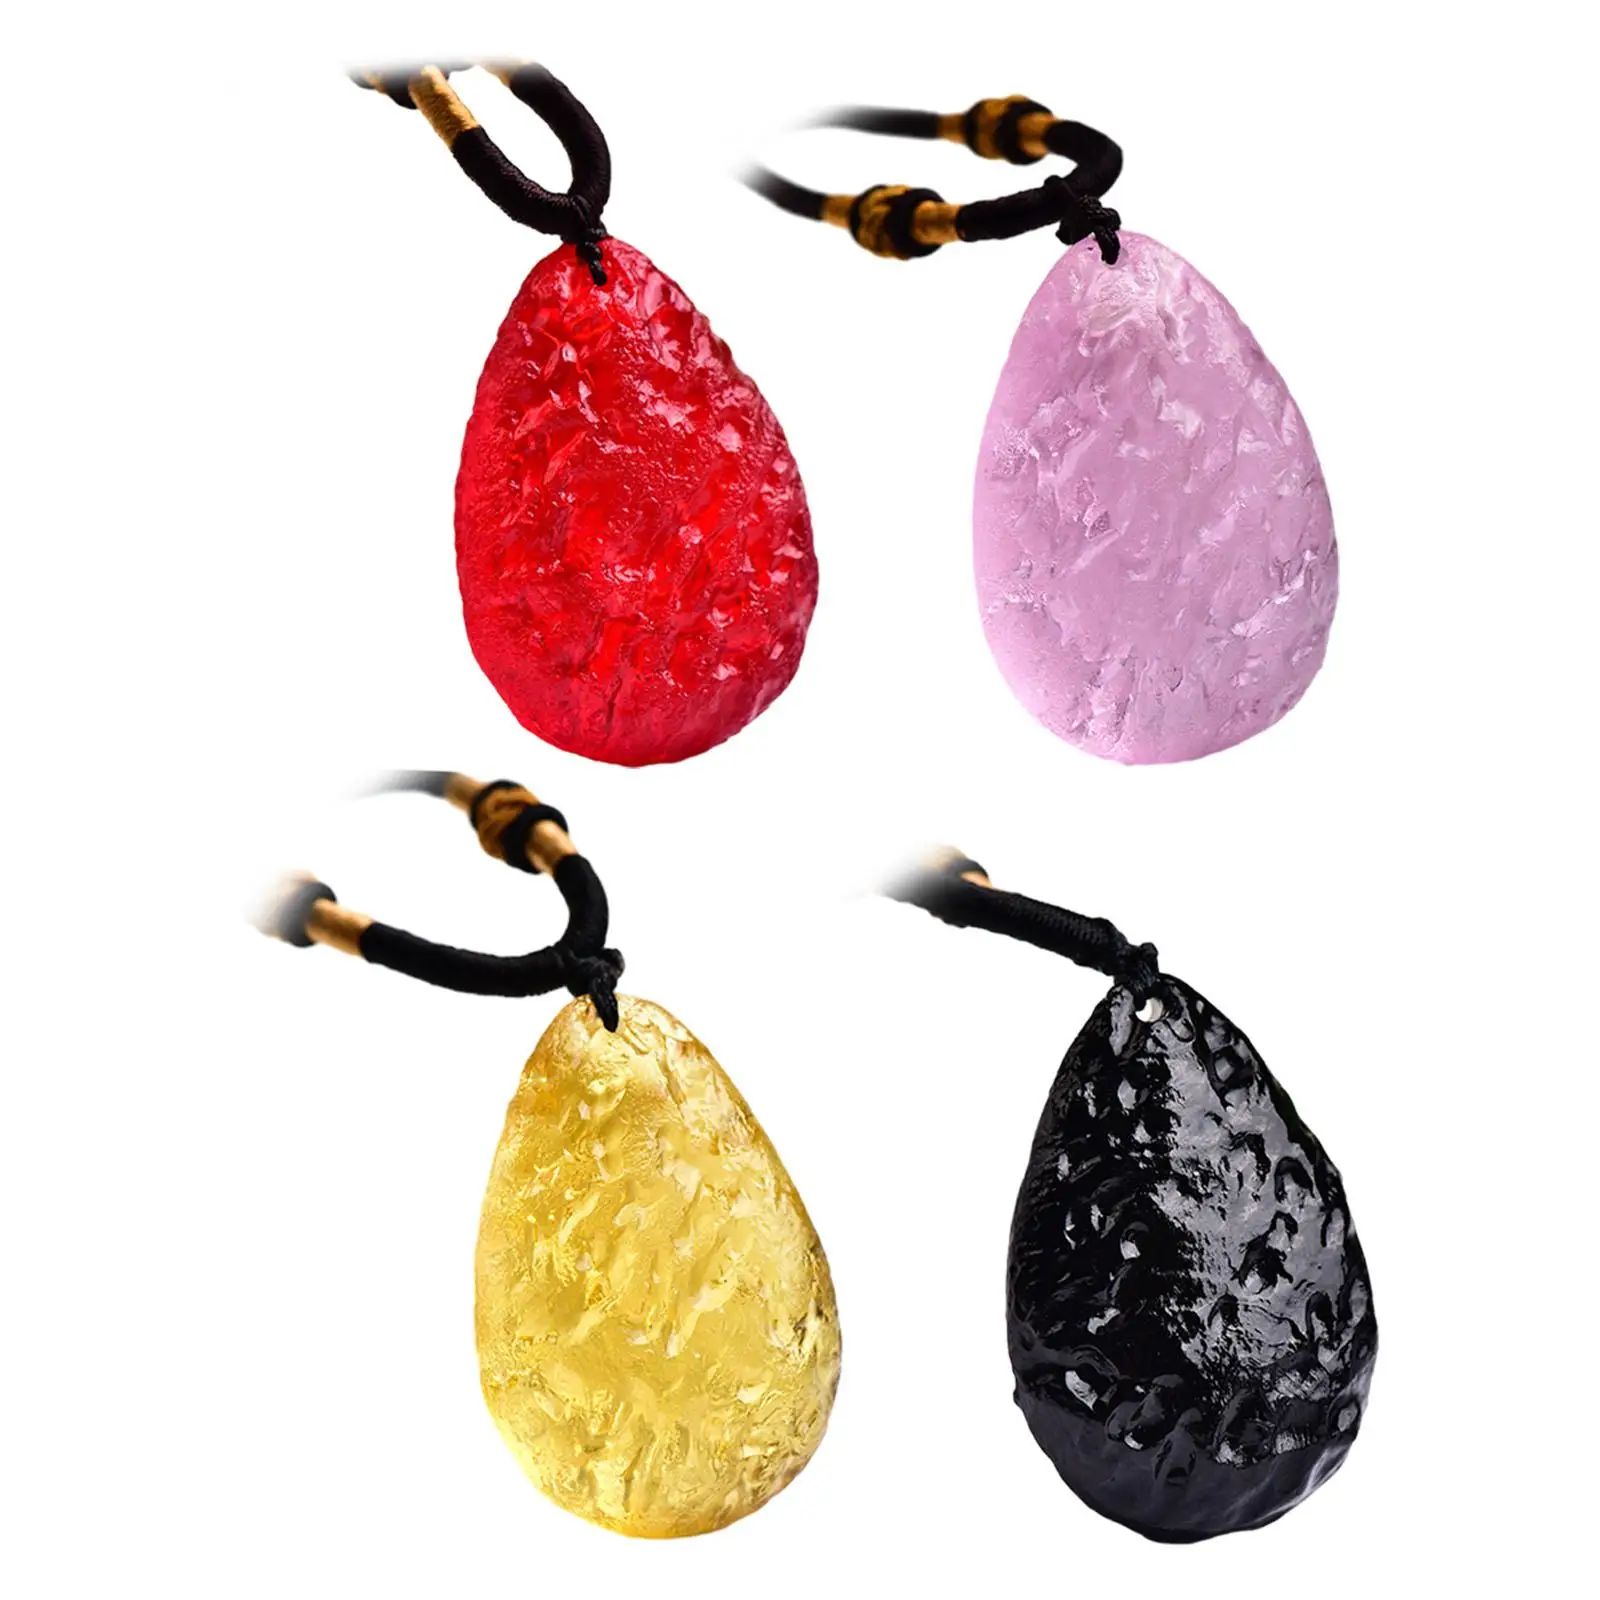 Pendant Necklace Fashion Jewelry Trendy Fans Accessories Teardrop Pendant Charm Necklace for Festival Birthday Anniversary